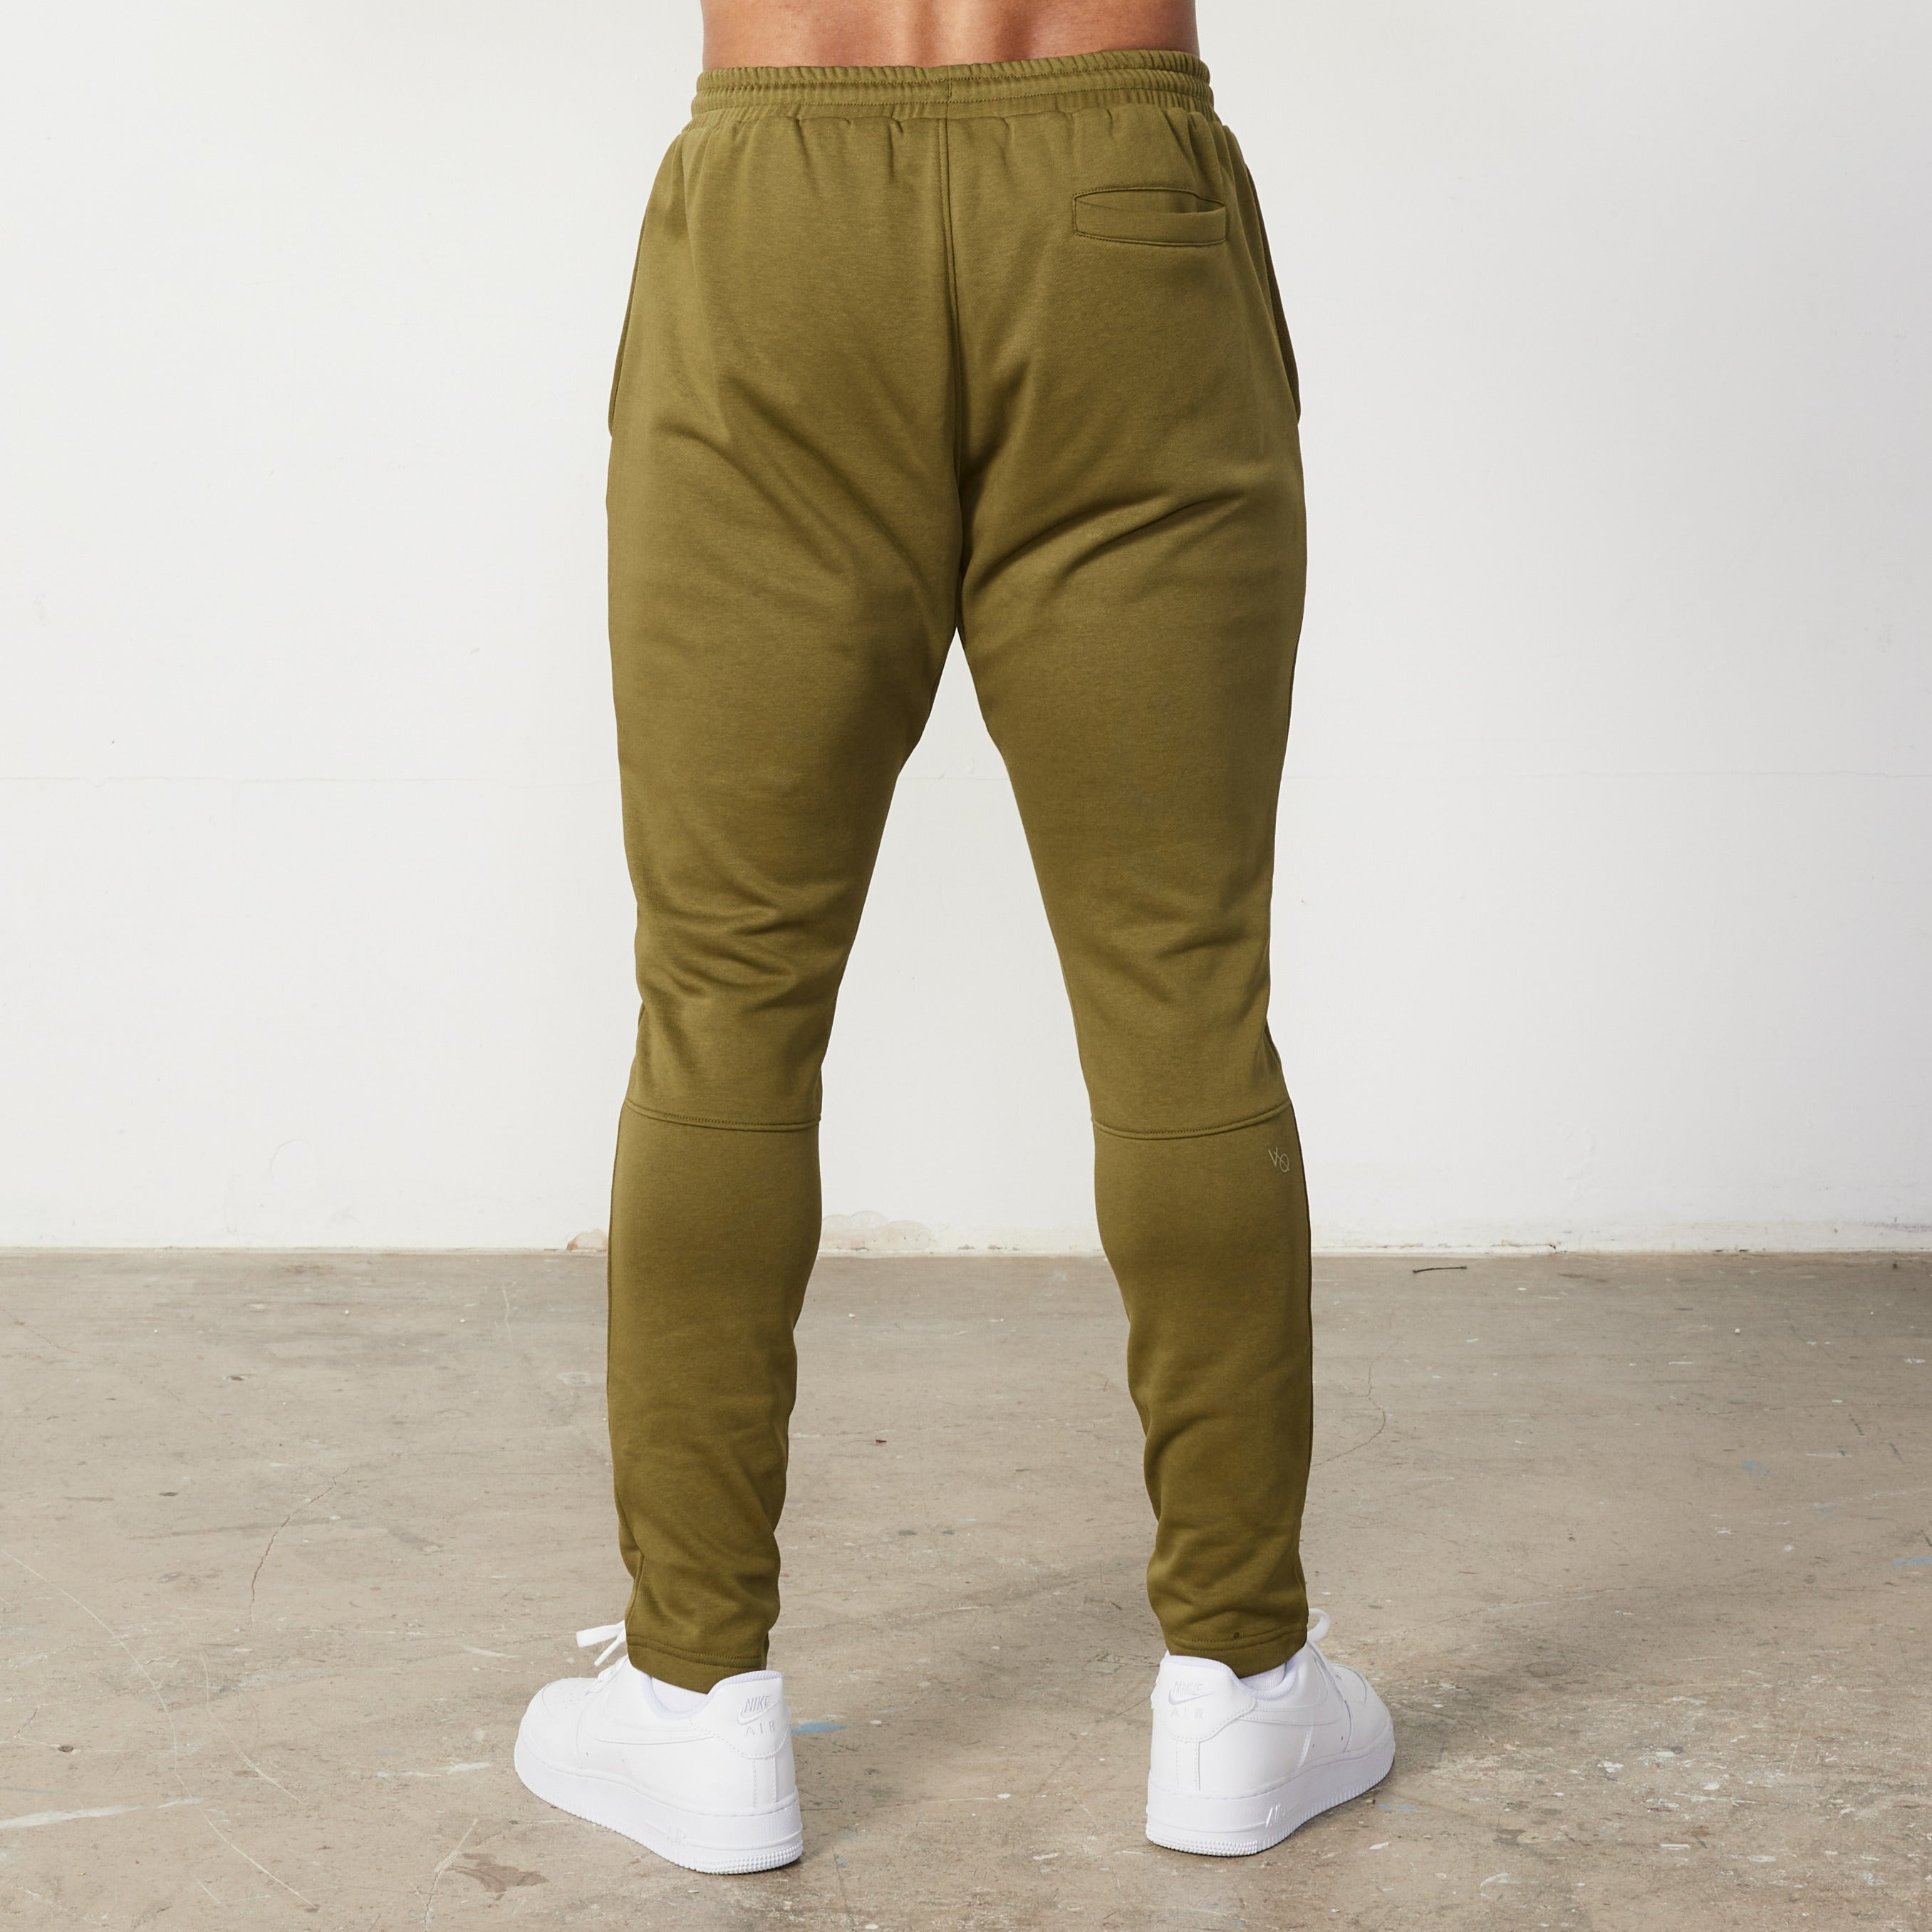 Vanquish Essential Olive Green Tapered Fit Sweatpants